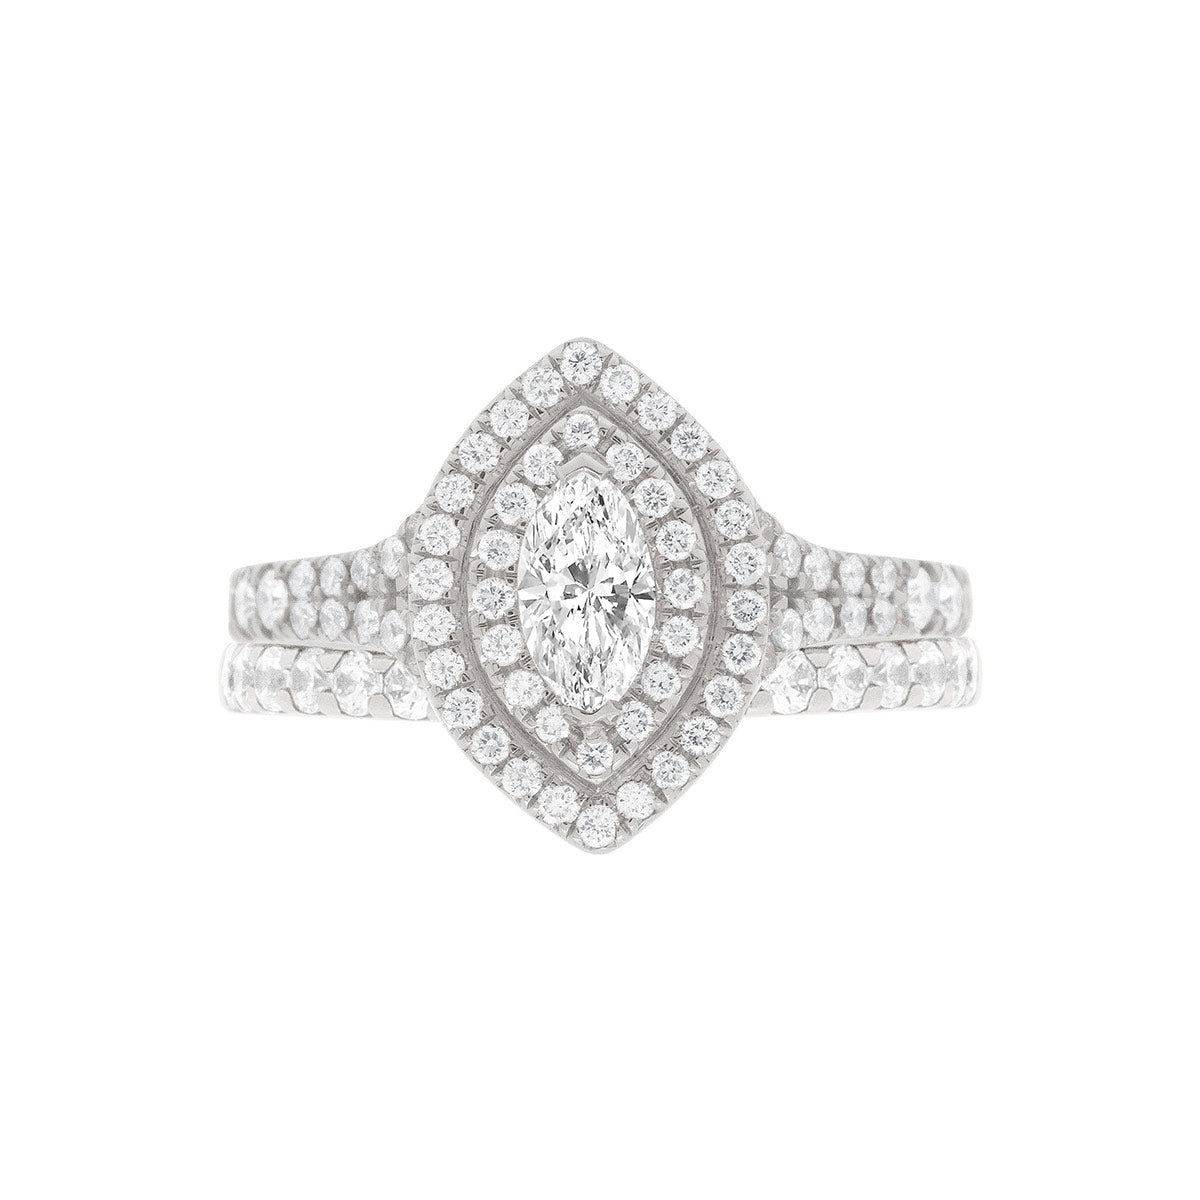 Double Halo Marquise Ring IN WHITE GOLD and pictured with a matching diamond wedding ring